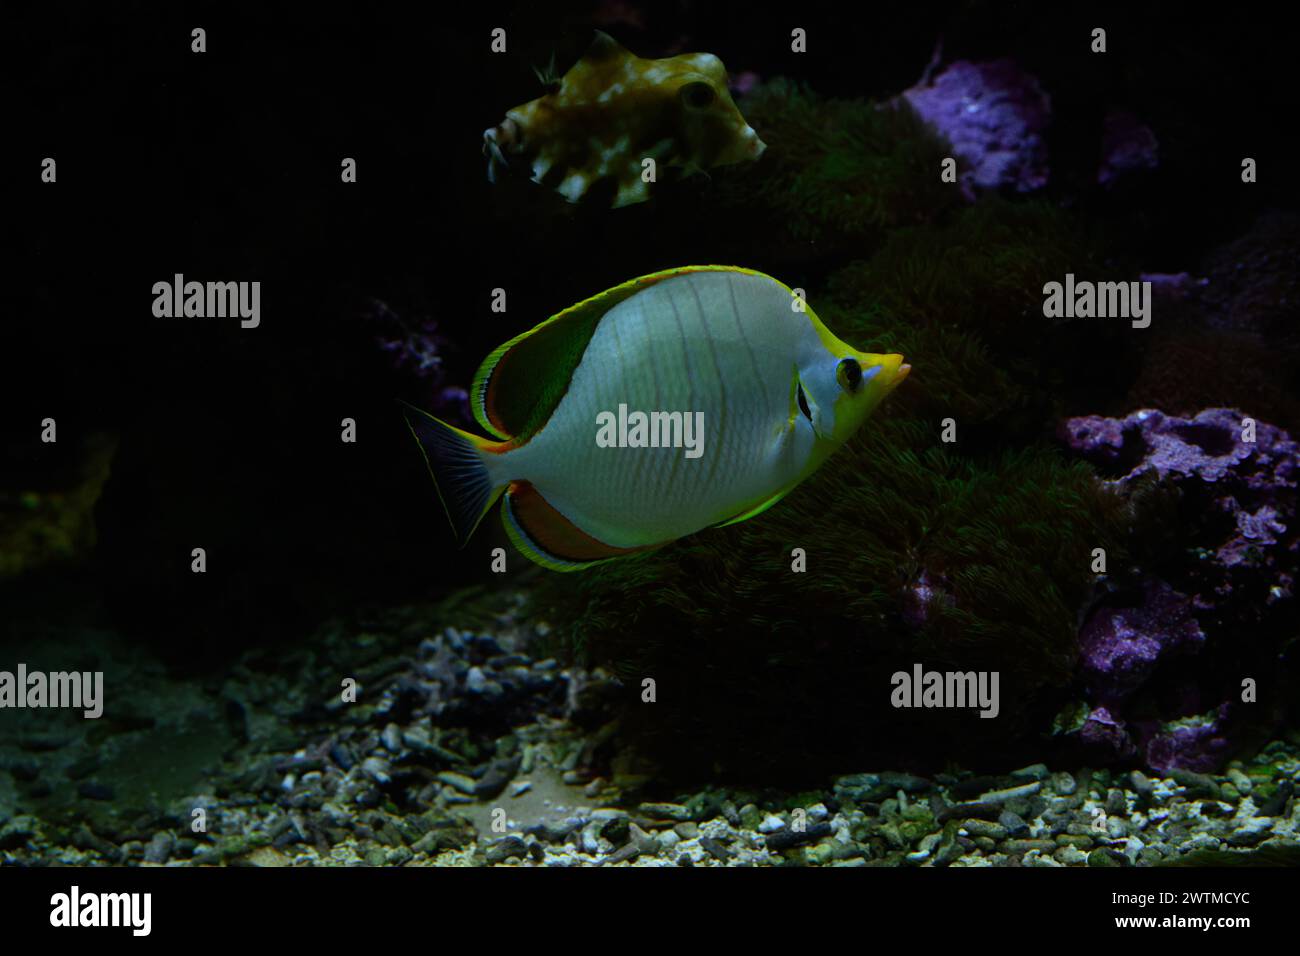 Chaetodon xanthocephalus, known commonly as the Yellowhead butterflyfish, is a species of marine fish in the family Chaetodontidae. Stock Photo